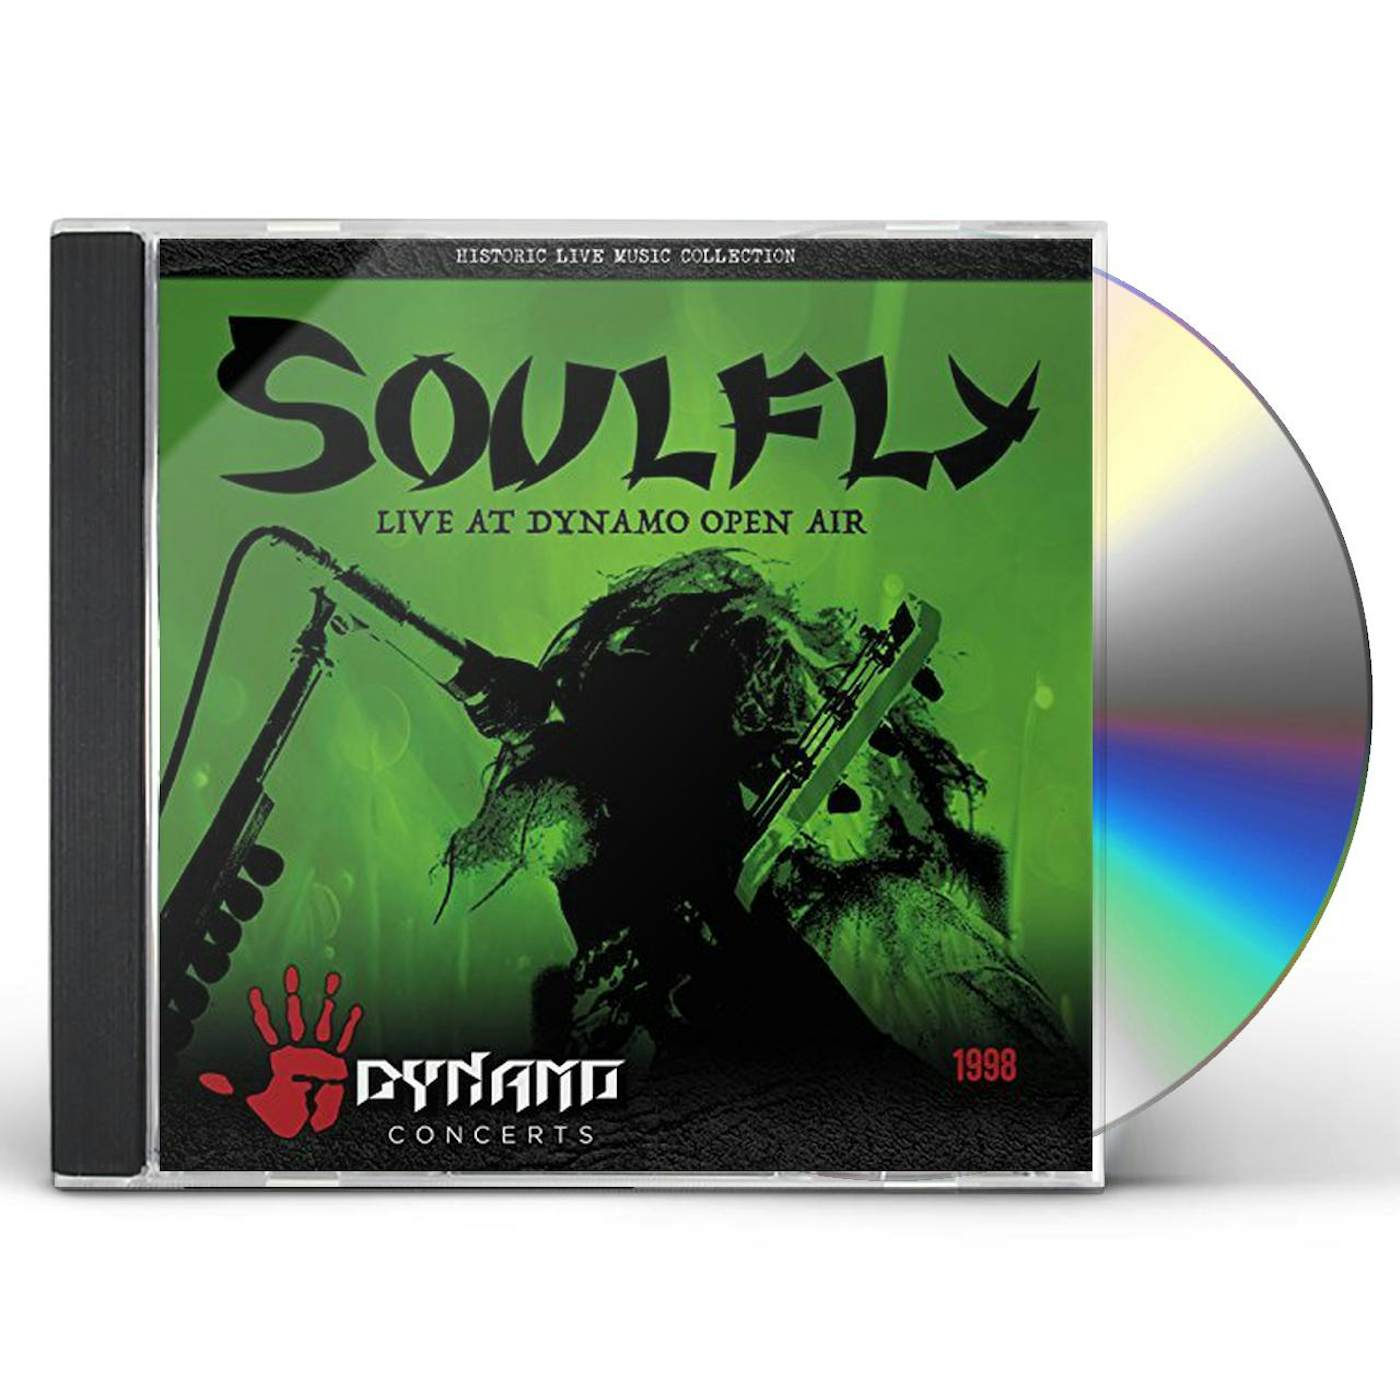 Soulfly LIVE AT DYNAMO OPEN AIR 1998 CD